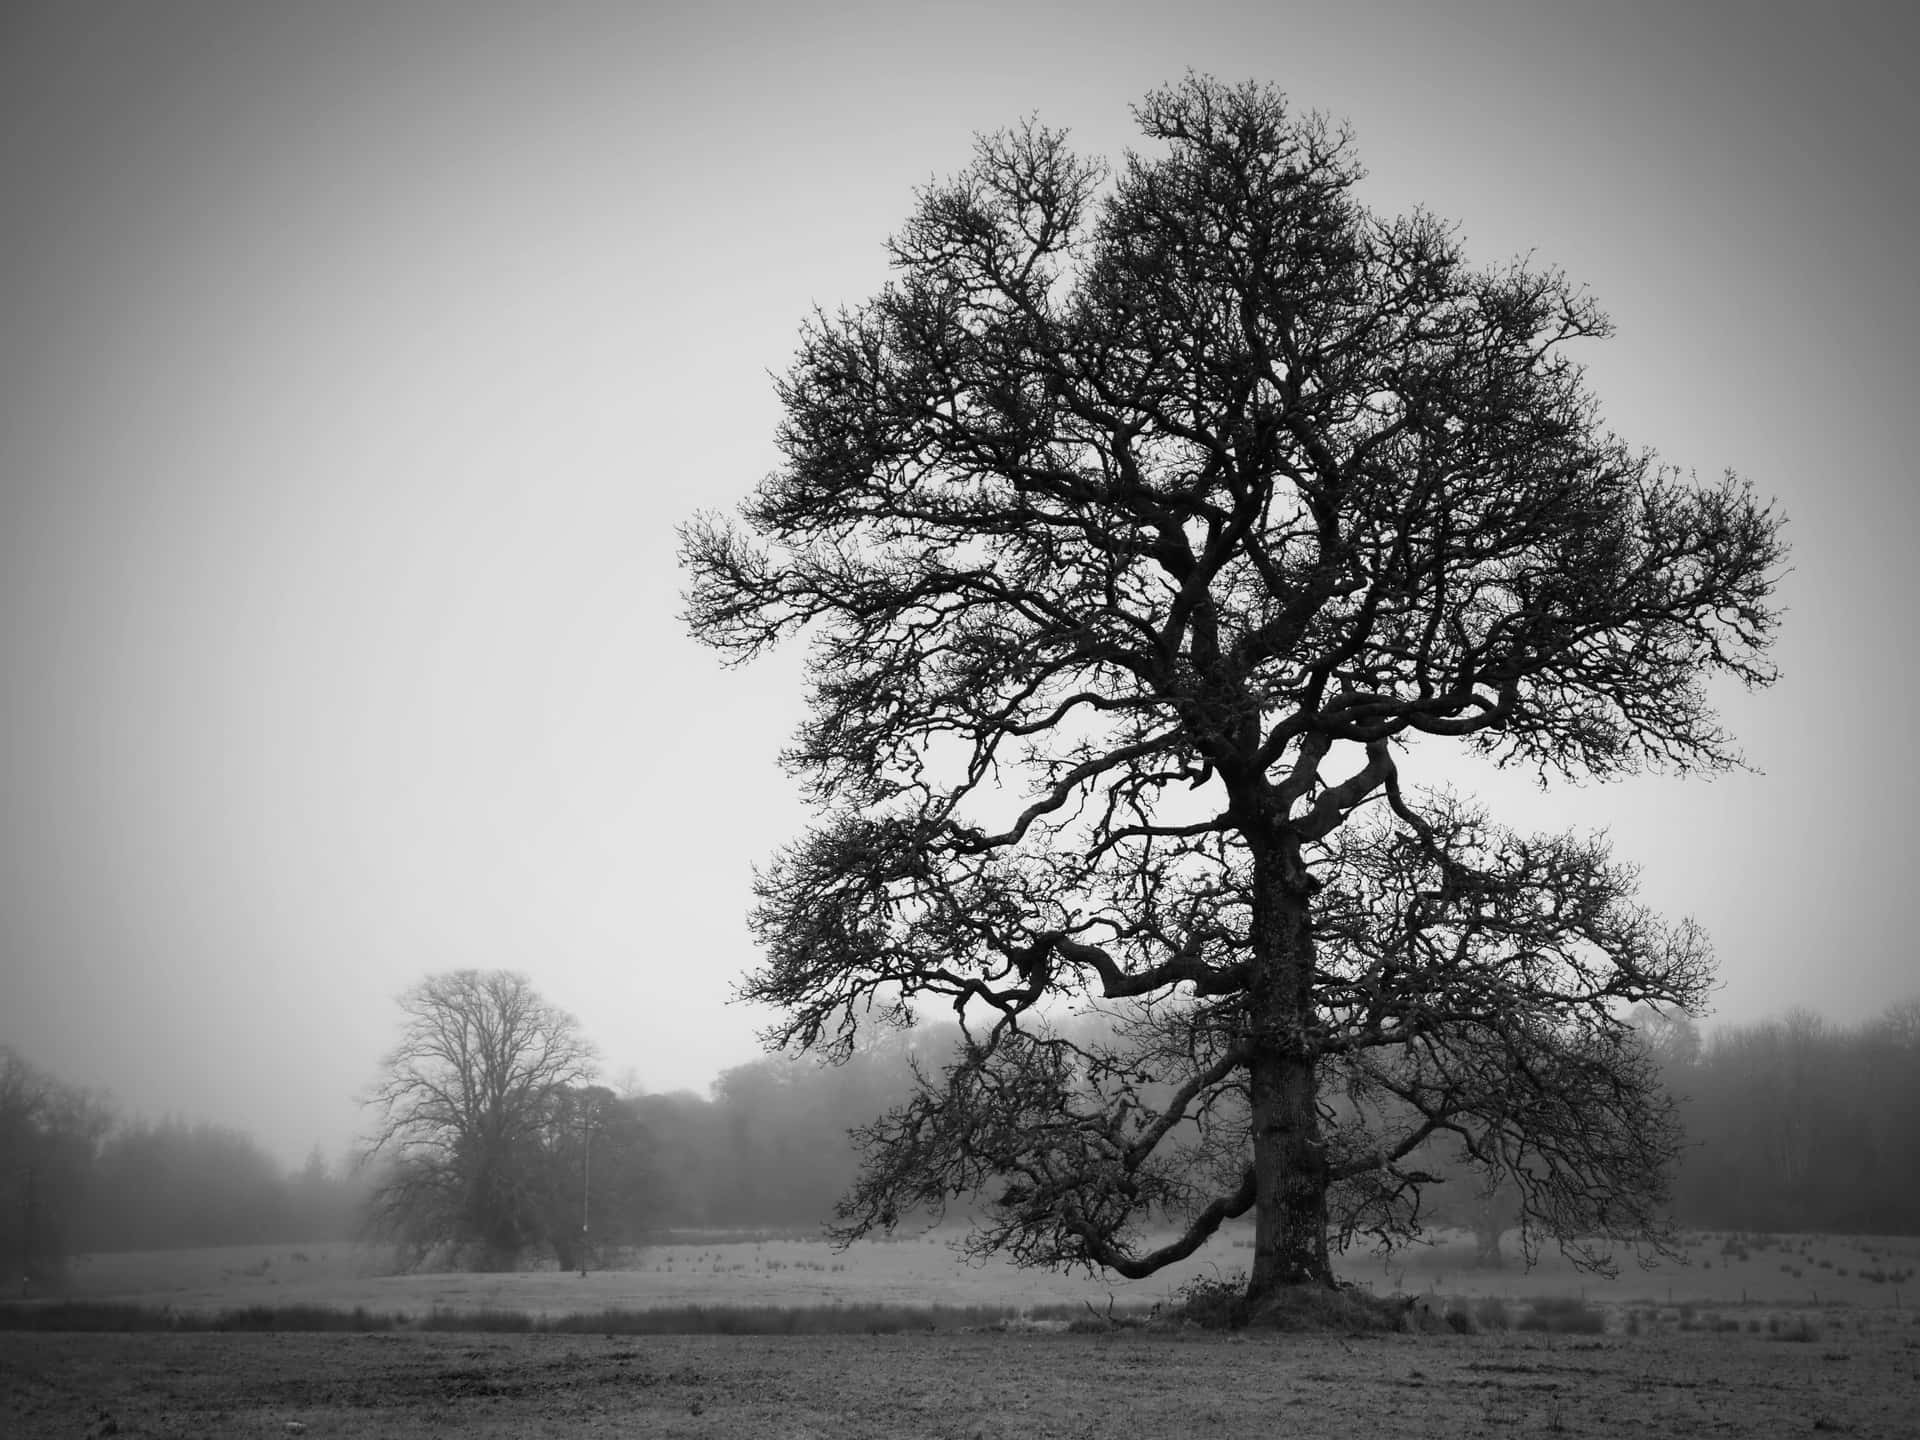 Captivating black and white tree standing tall amidst the tranquil landscape Wallpaper